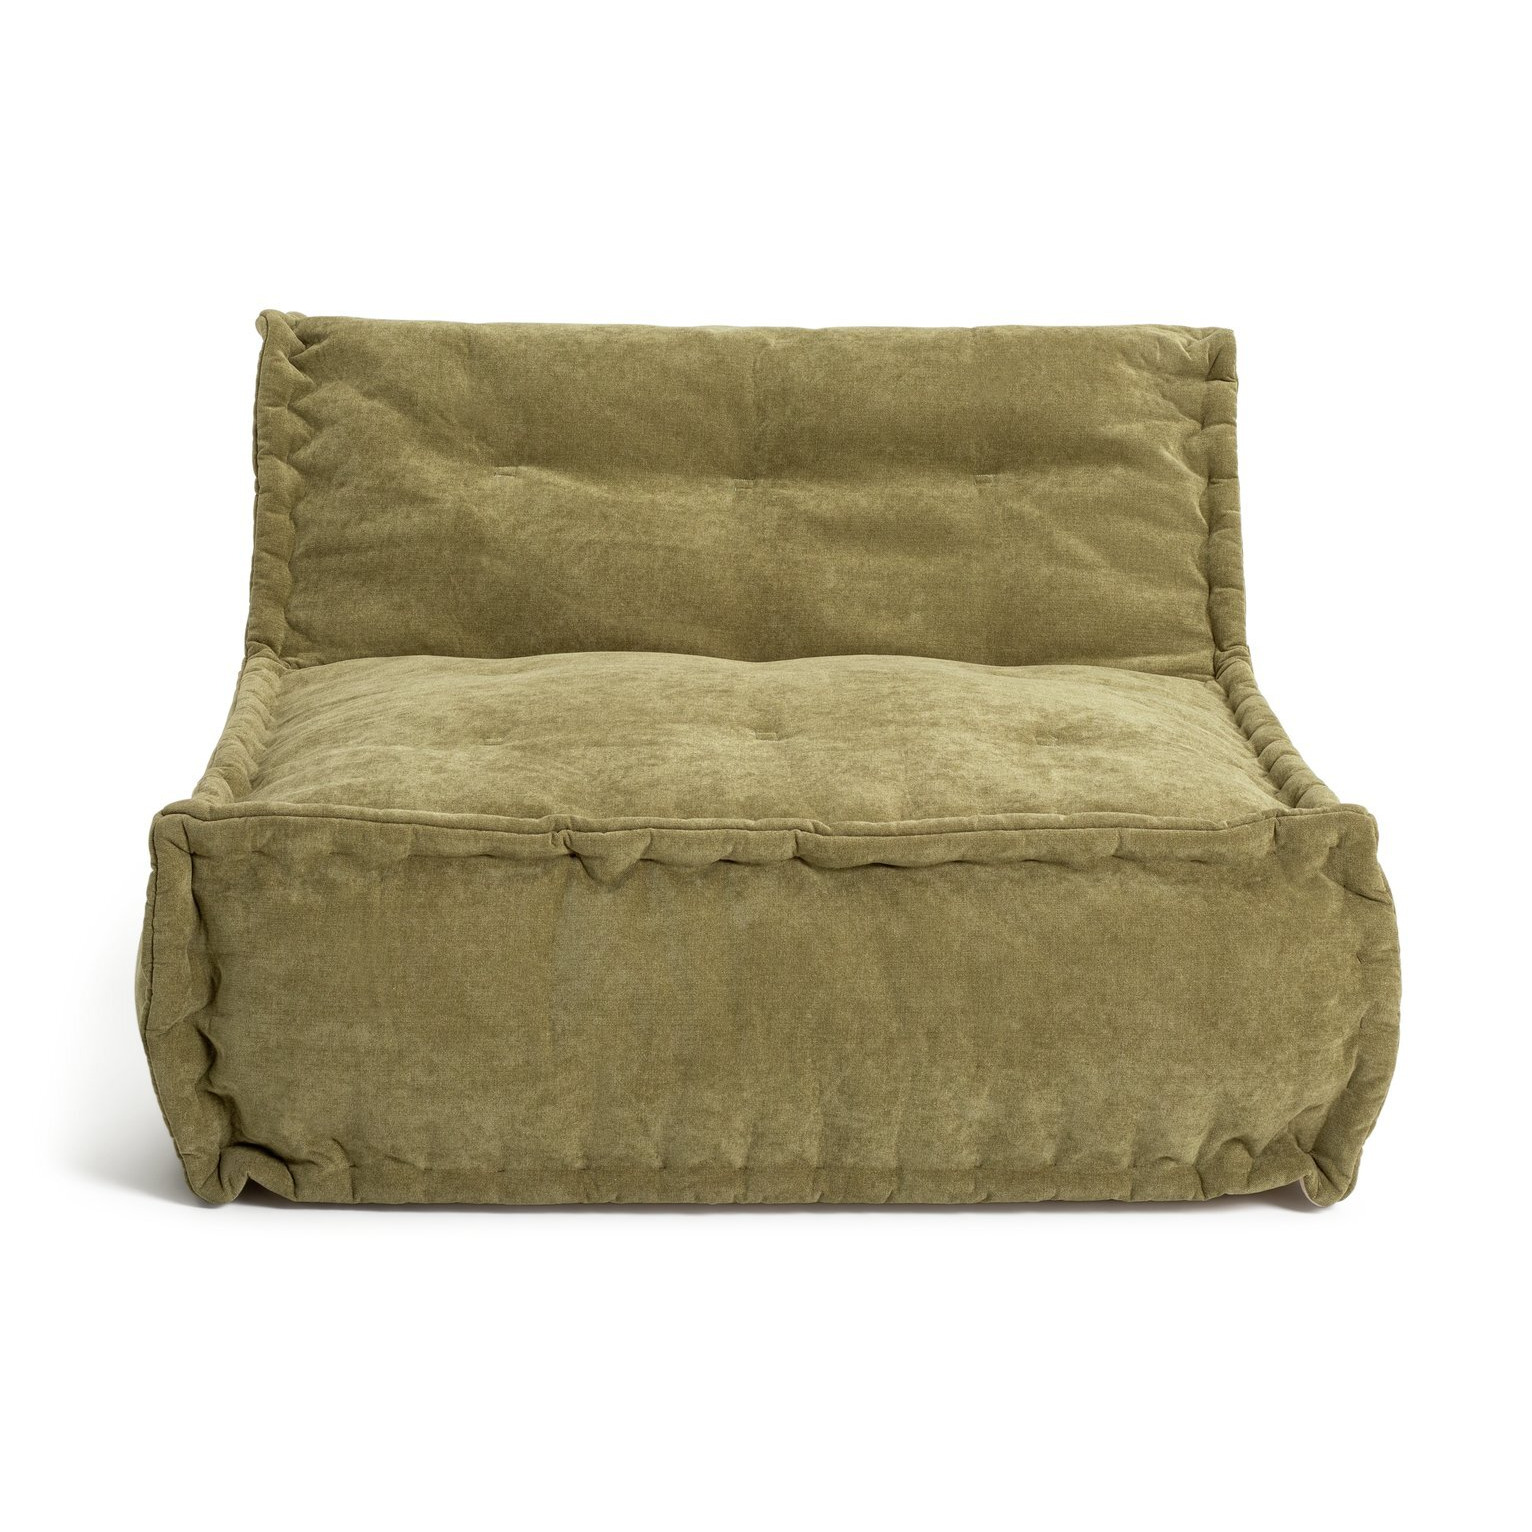 Kaikoo Estelle Quilted Bean Bag - Green - image 1